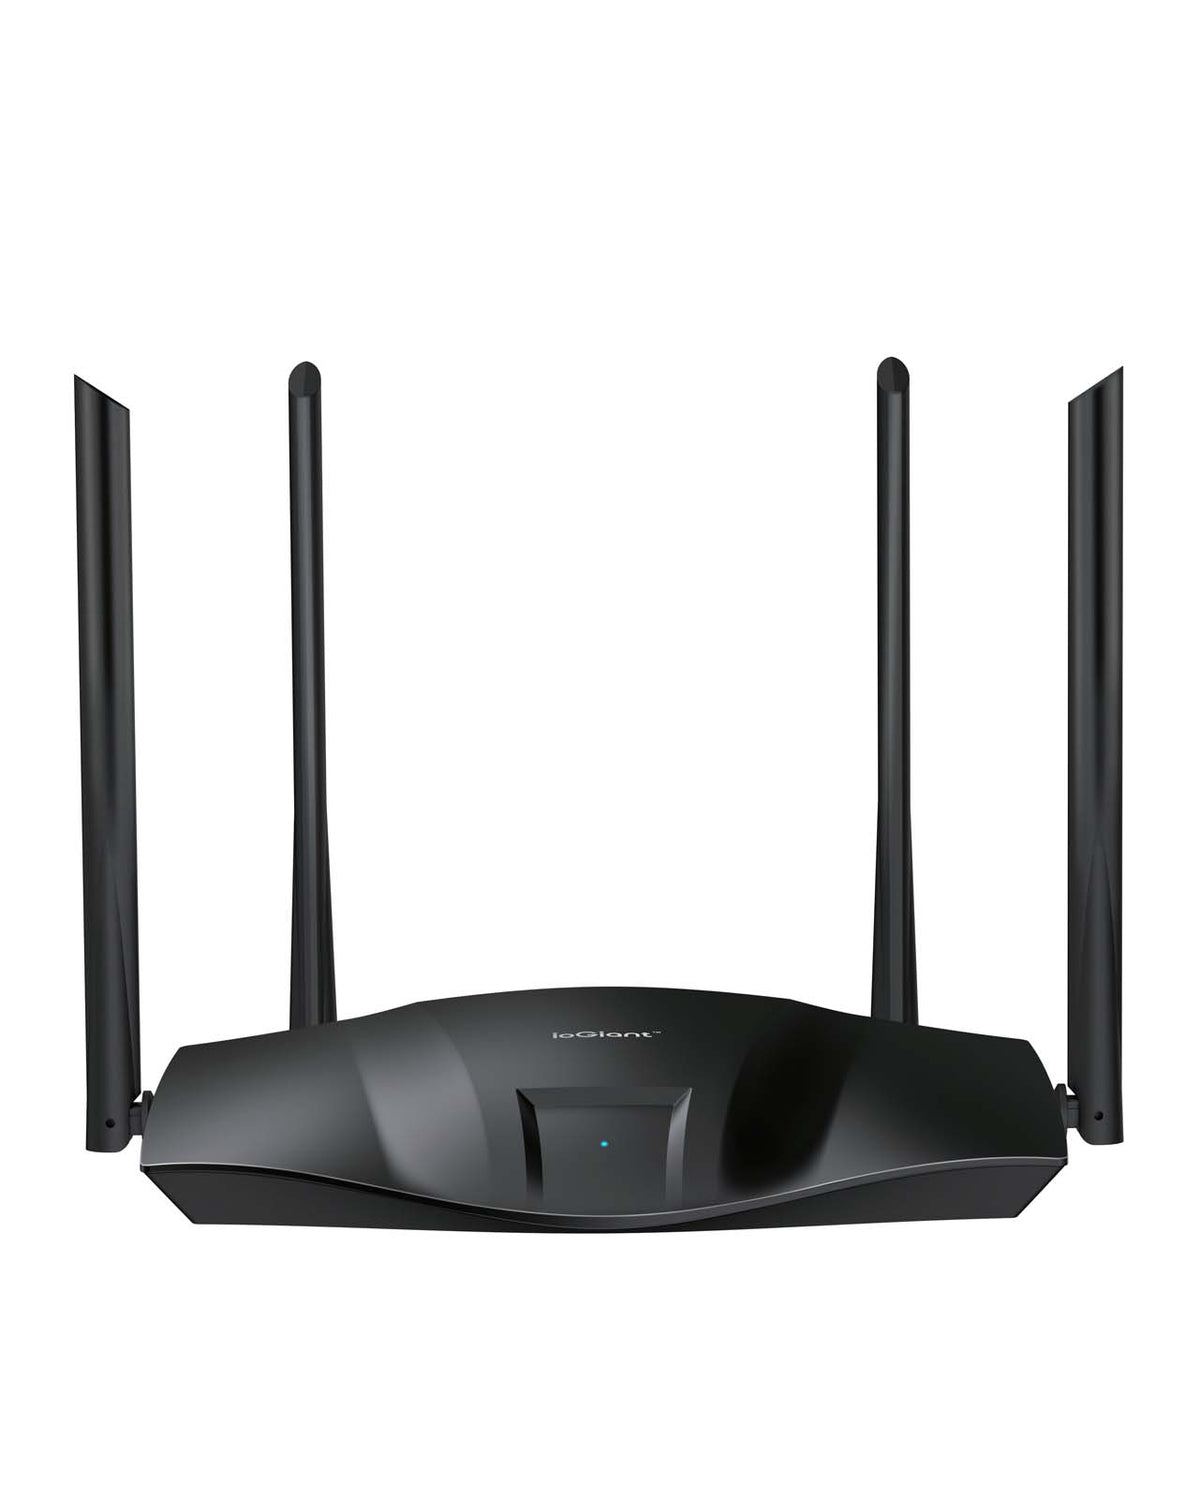 wifi 6 router